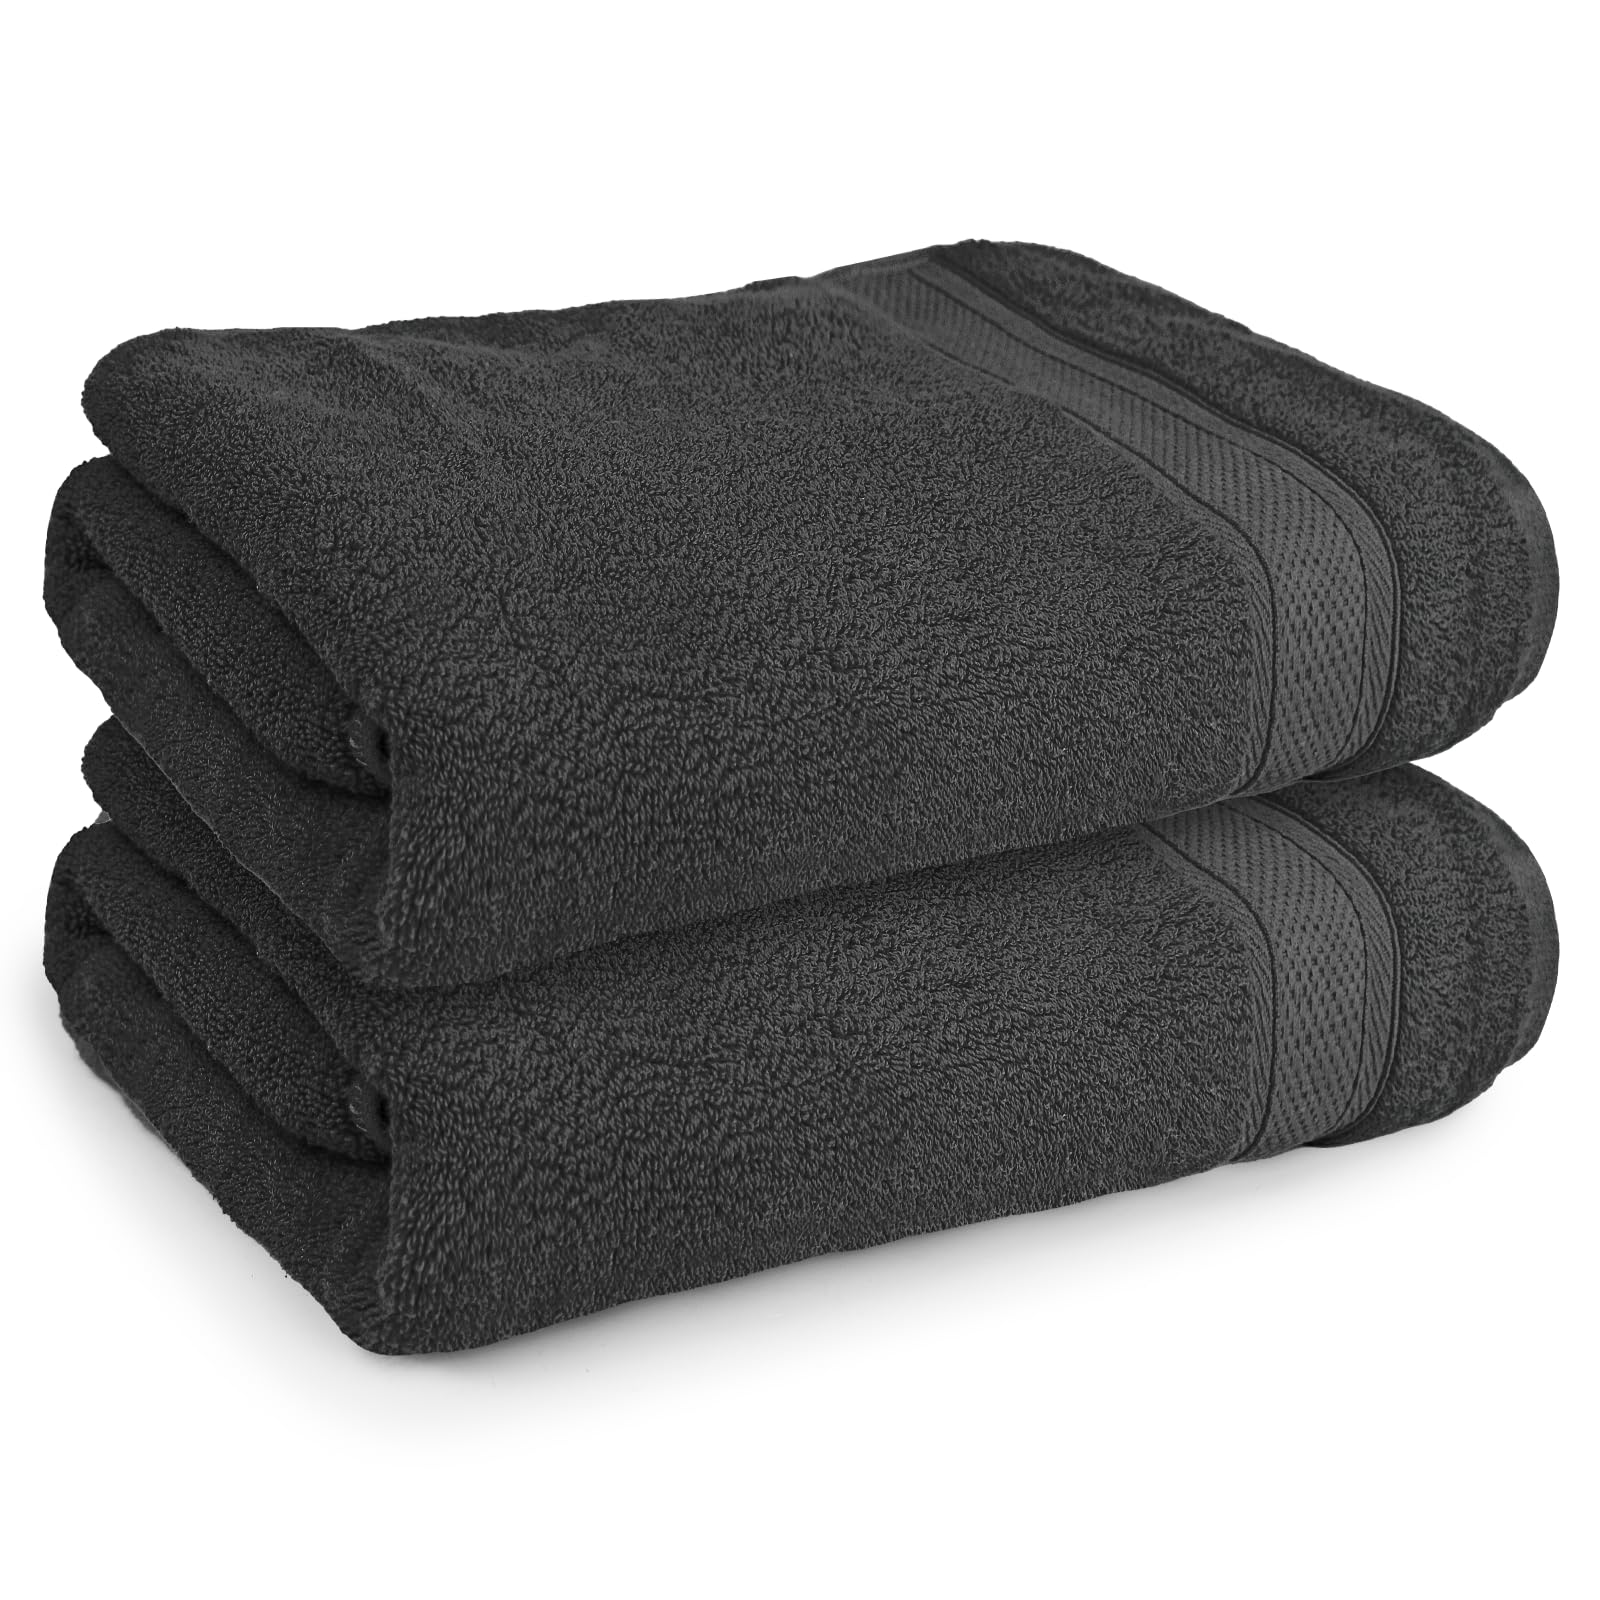 Magshion Extra Large Cotton Bath Sheet for Bathroom Adults Oversized Quick-Dry Bath Sheet Towels Set of 2,Black